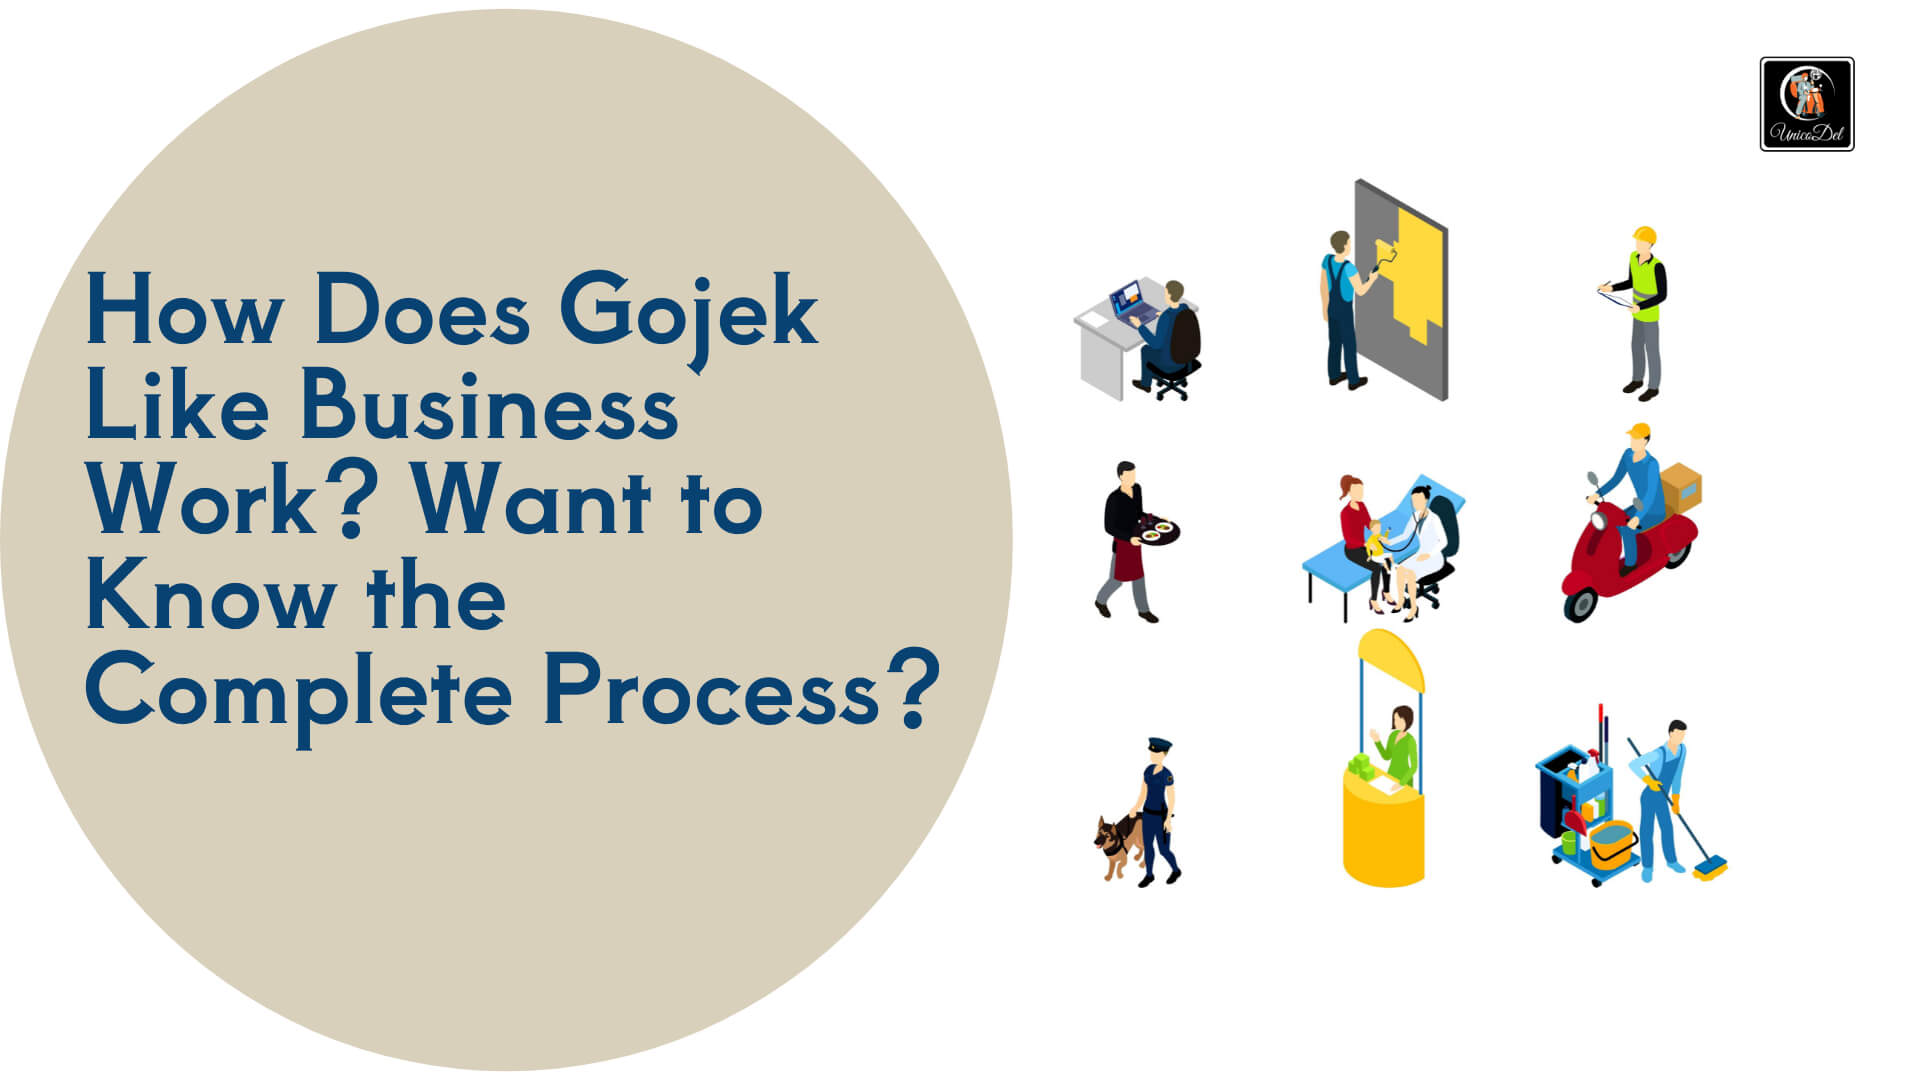 How Does Gojek Like Business Work? Want to Know the Complete Process?